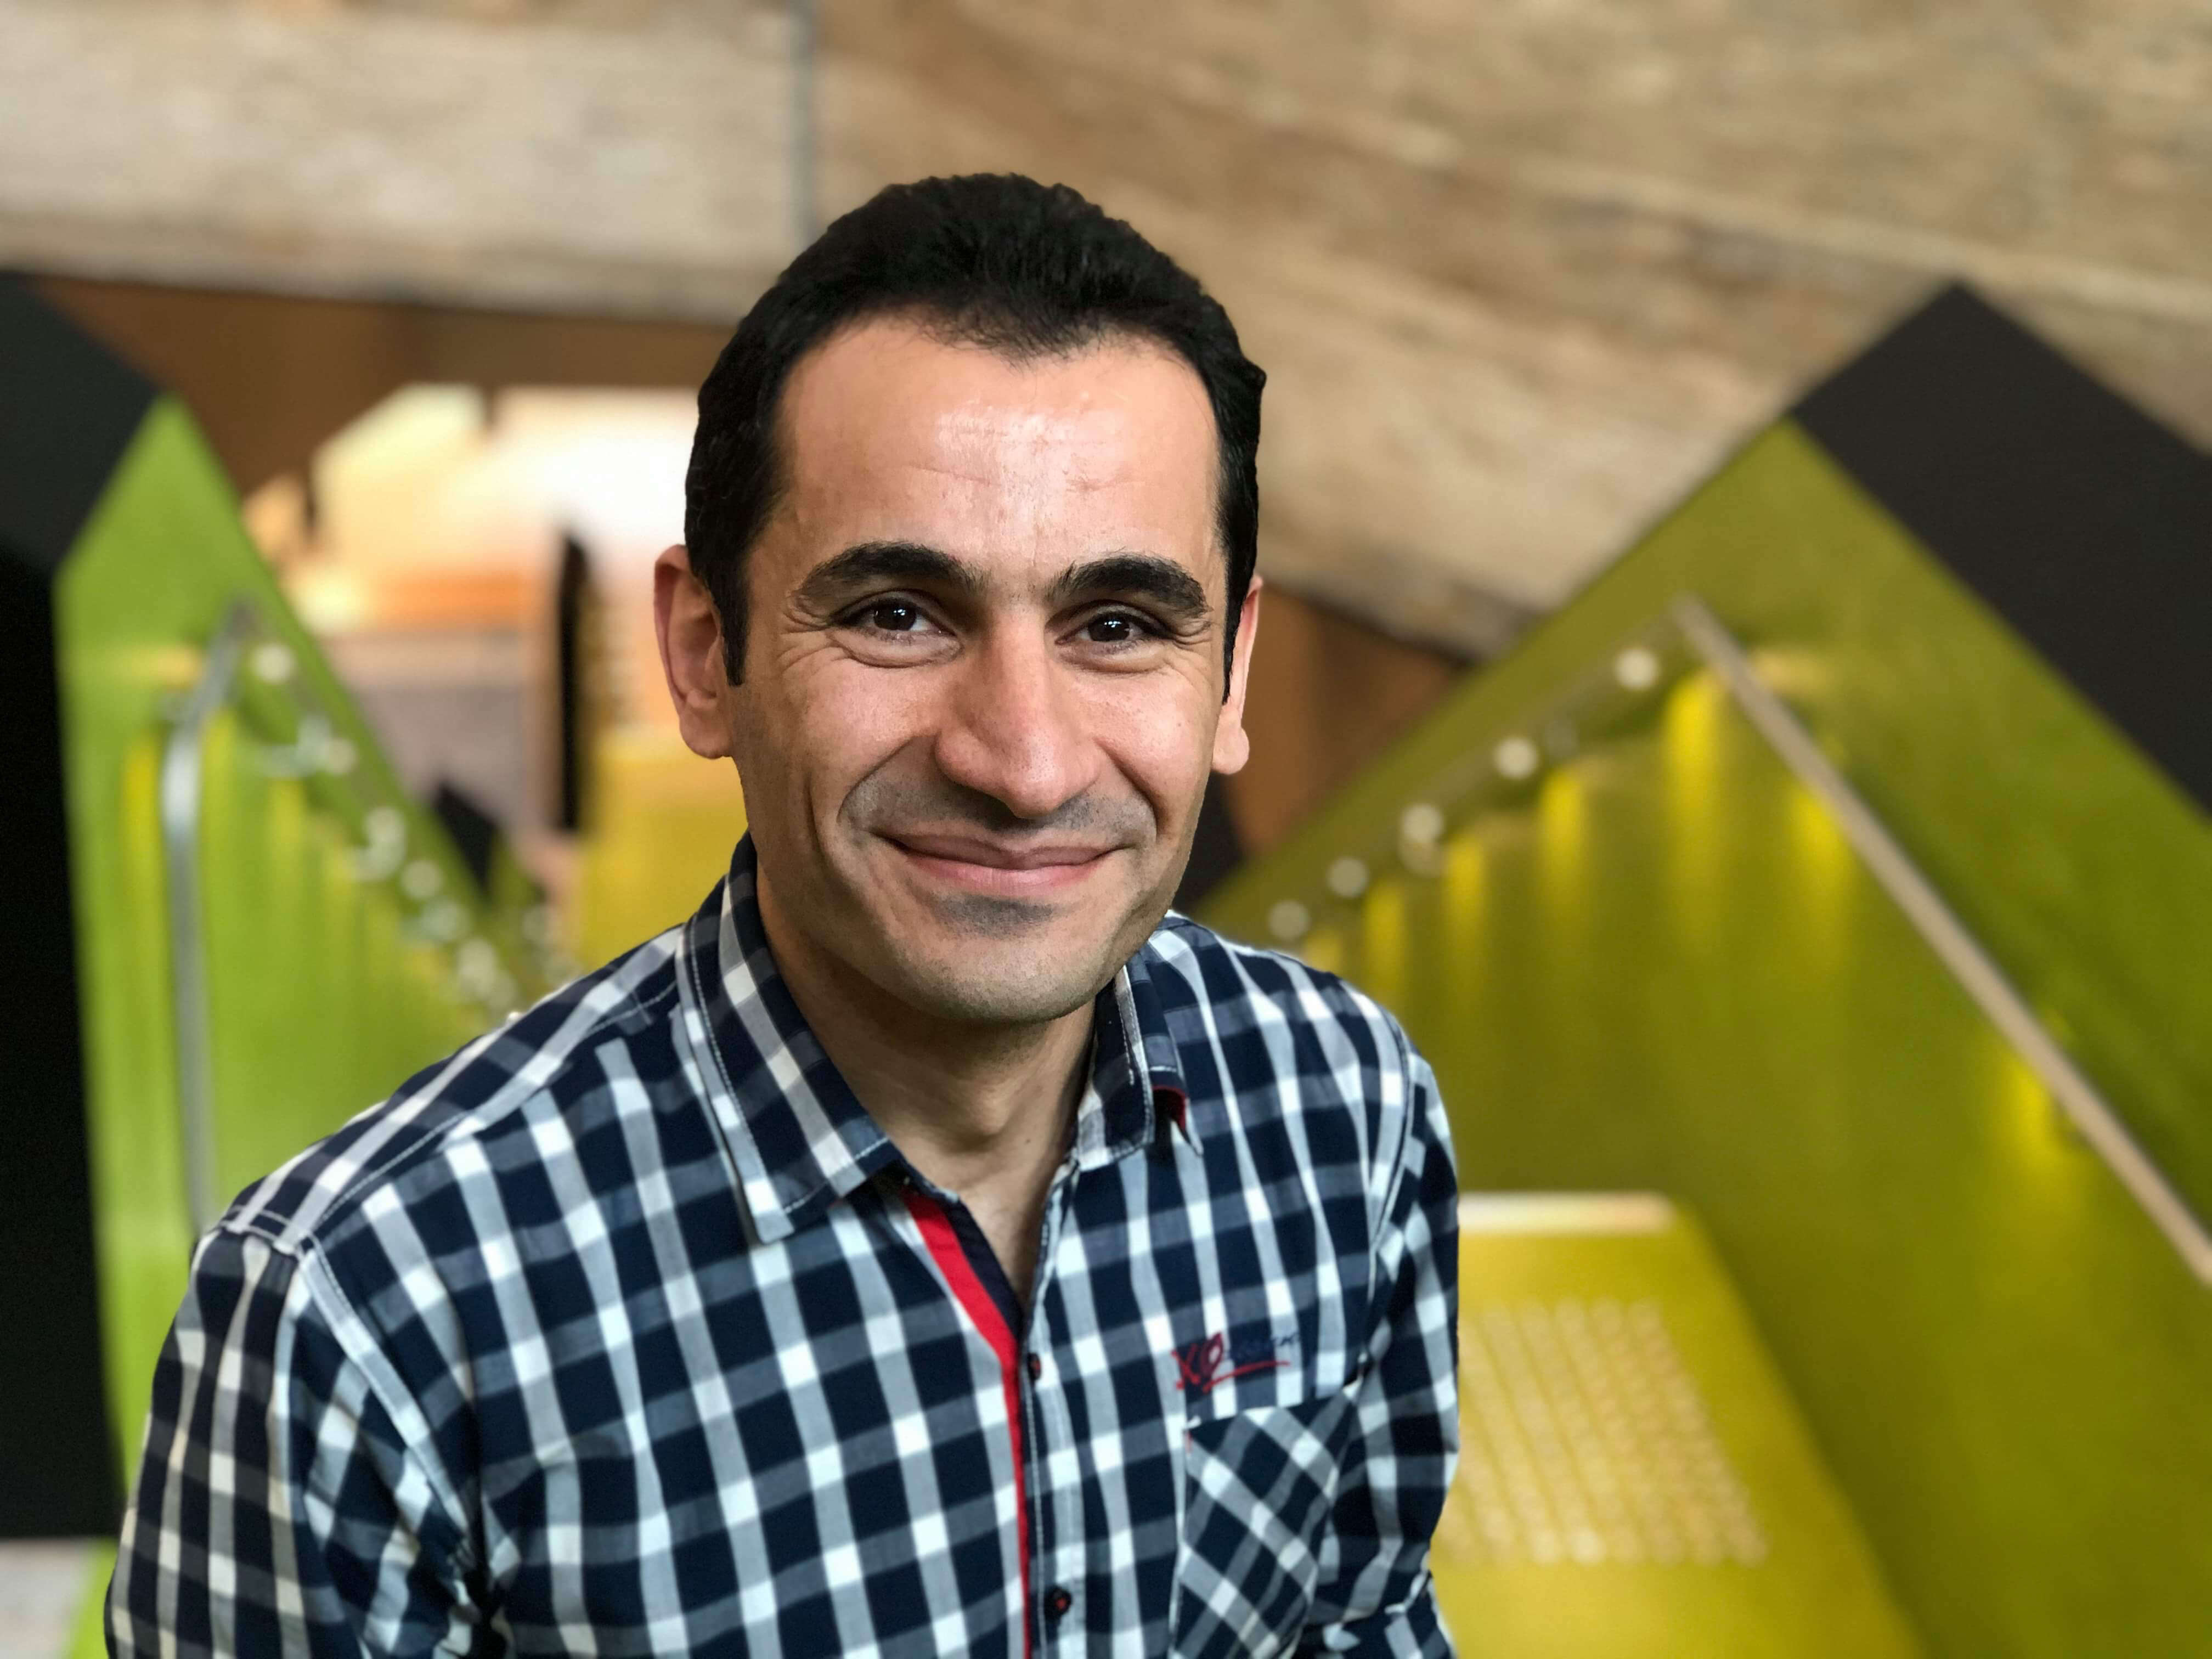 This Iranian PhD graduate is more than grateful to return to Australia